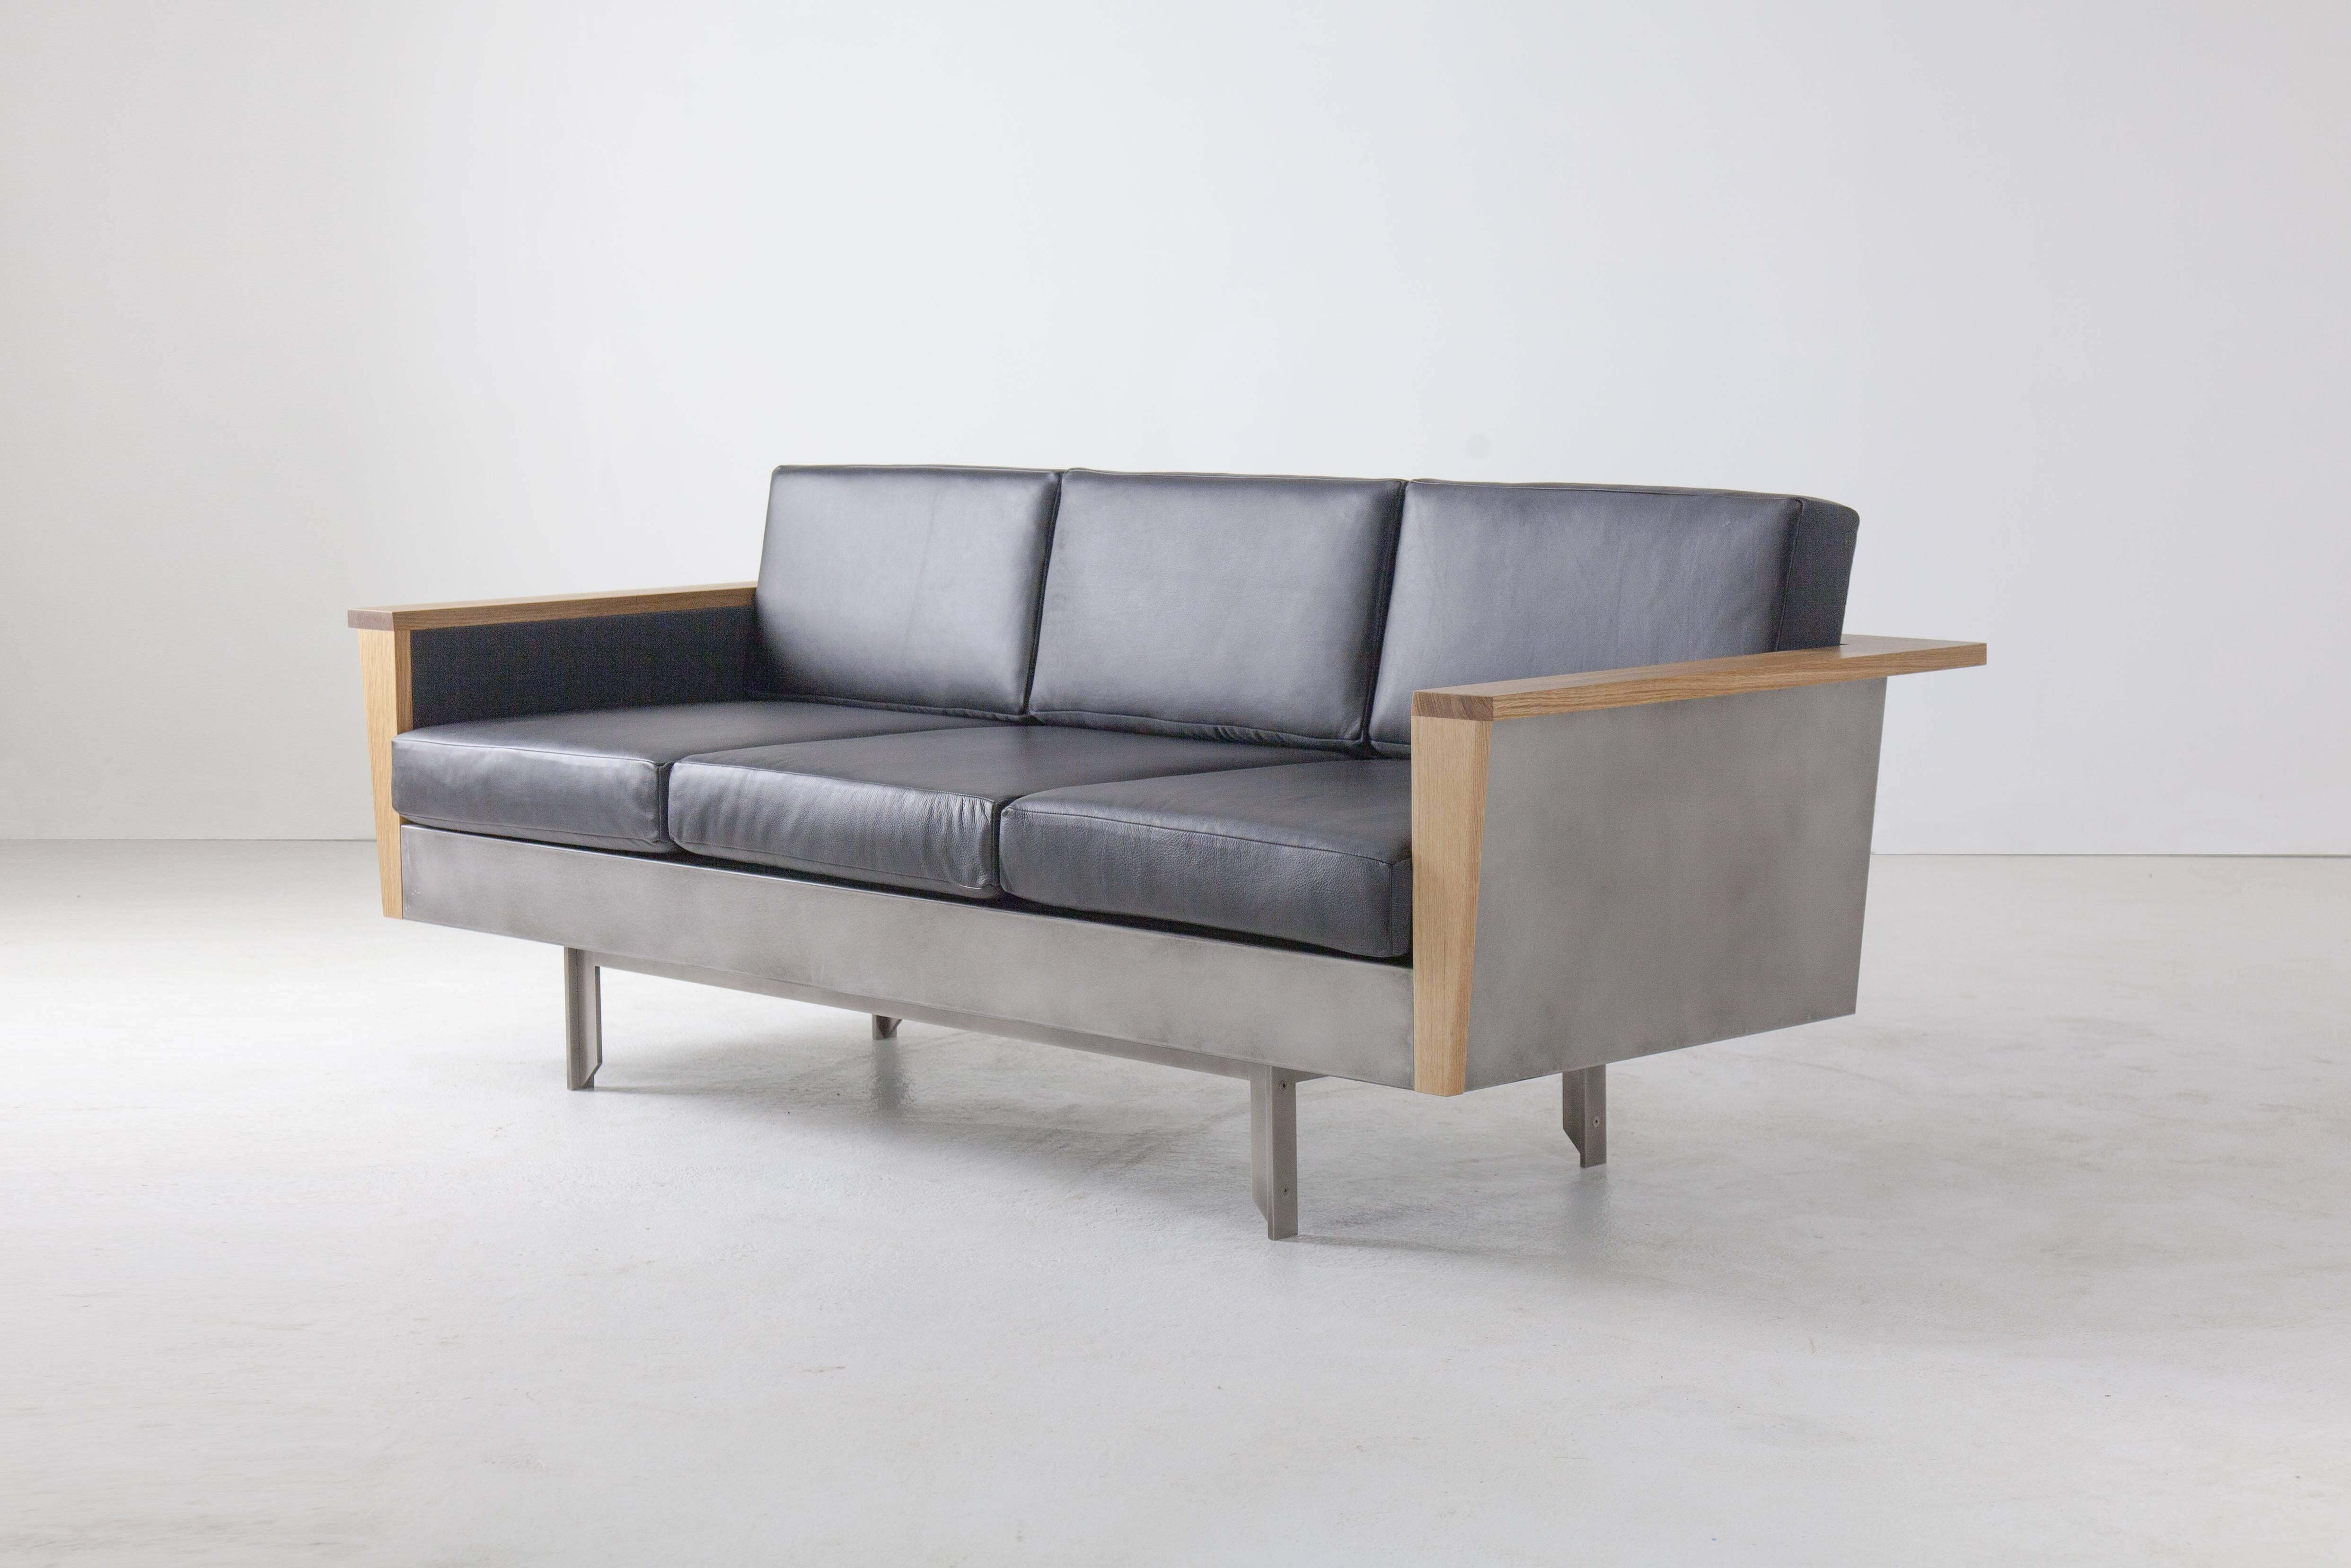 Louise Sofa, Wool, American Hardwood and Steel In New Condition For Sale In Brooklyn, NY